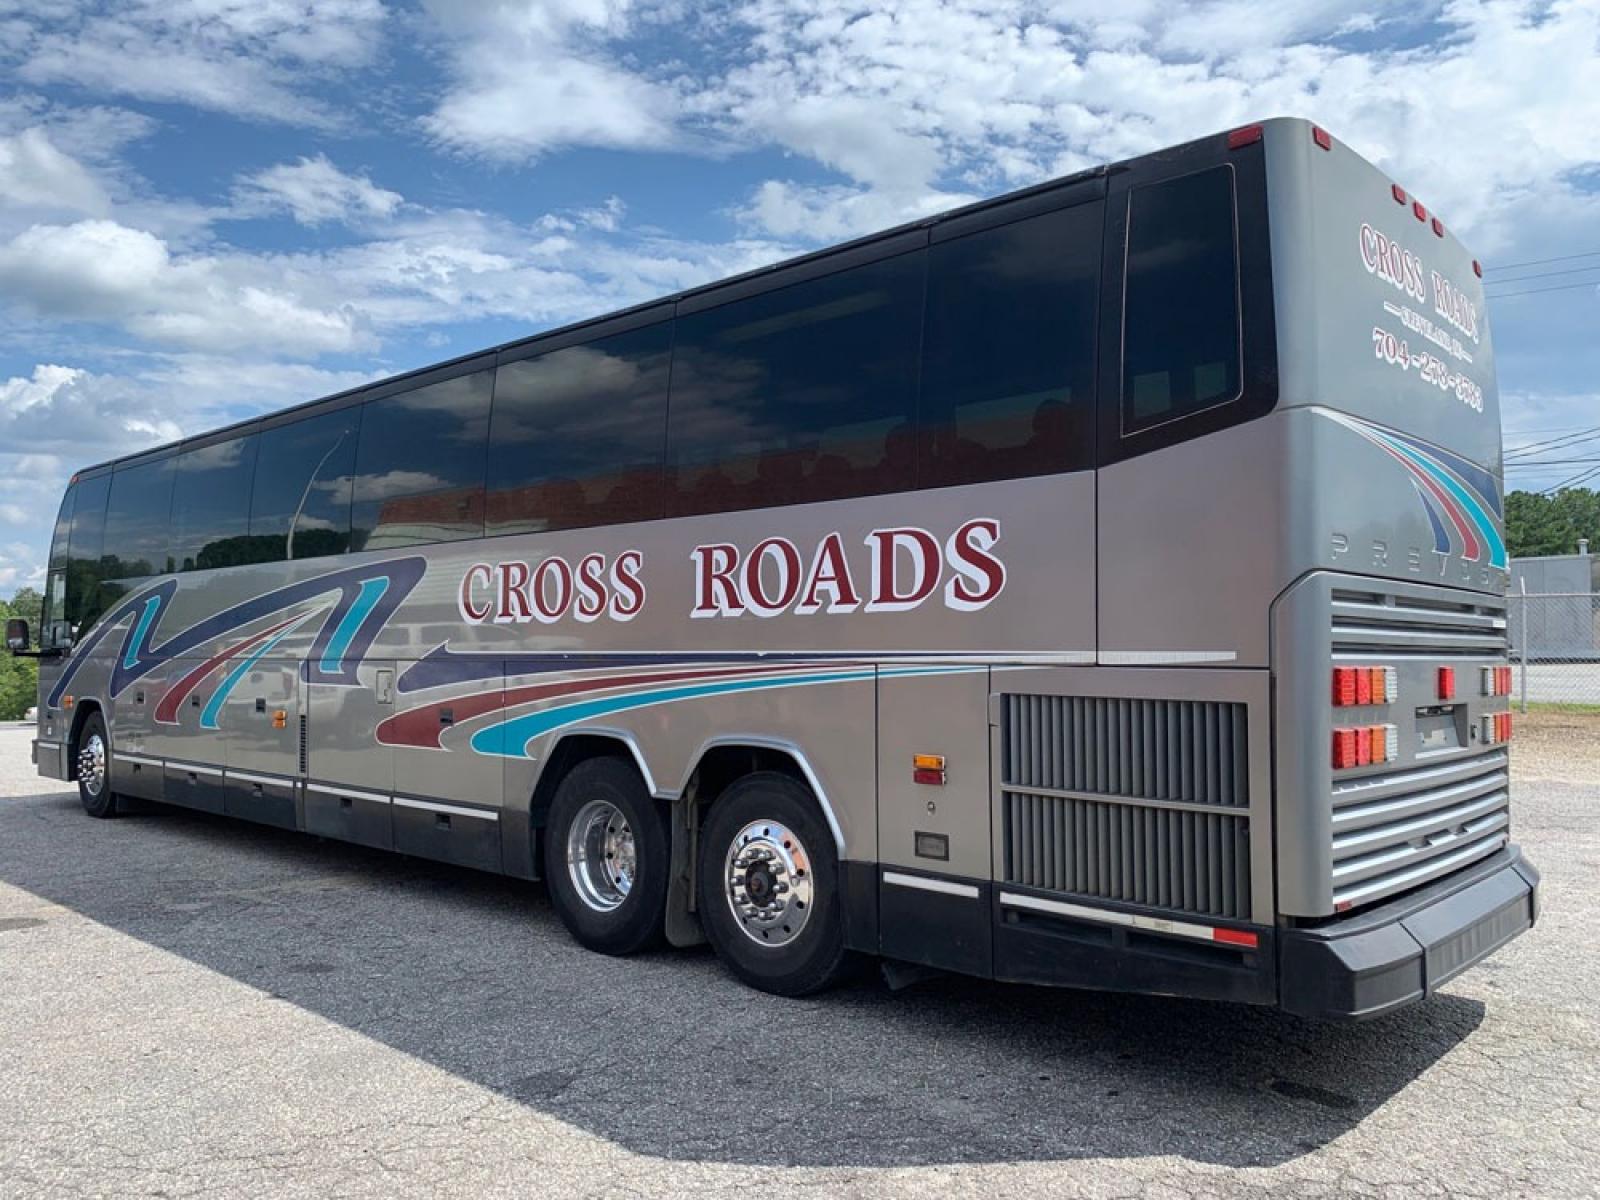 1998 Prevost HS-45 with an Detroit Diesel Series 60 engine, Allison transmission, 0.000000, 0.000000 - 1998 Prevost H3-45 - Series 60 Detroit Diesel - Allison Automatic Transmission - 45' - 56 Passengers -Enclosed Parcel Racks - 5 Flat Screens and DVD - Photo #3